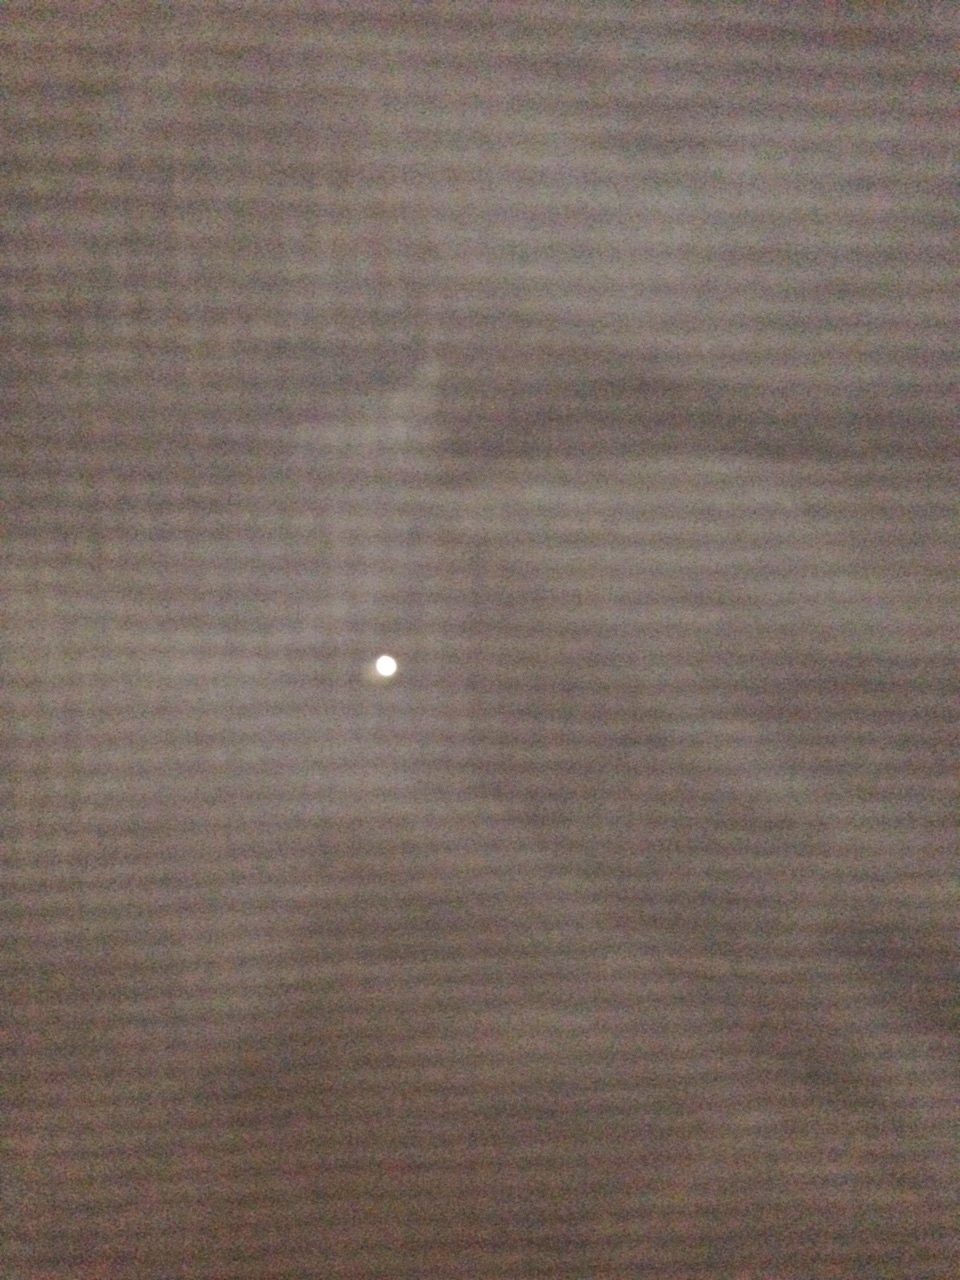 Tent fabric with pinhole